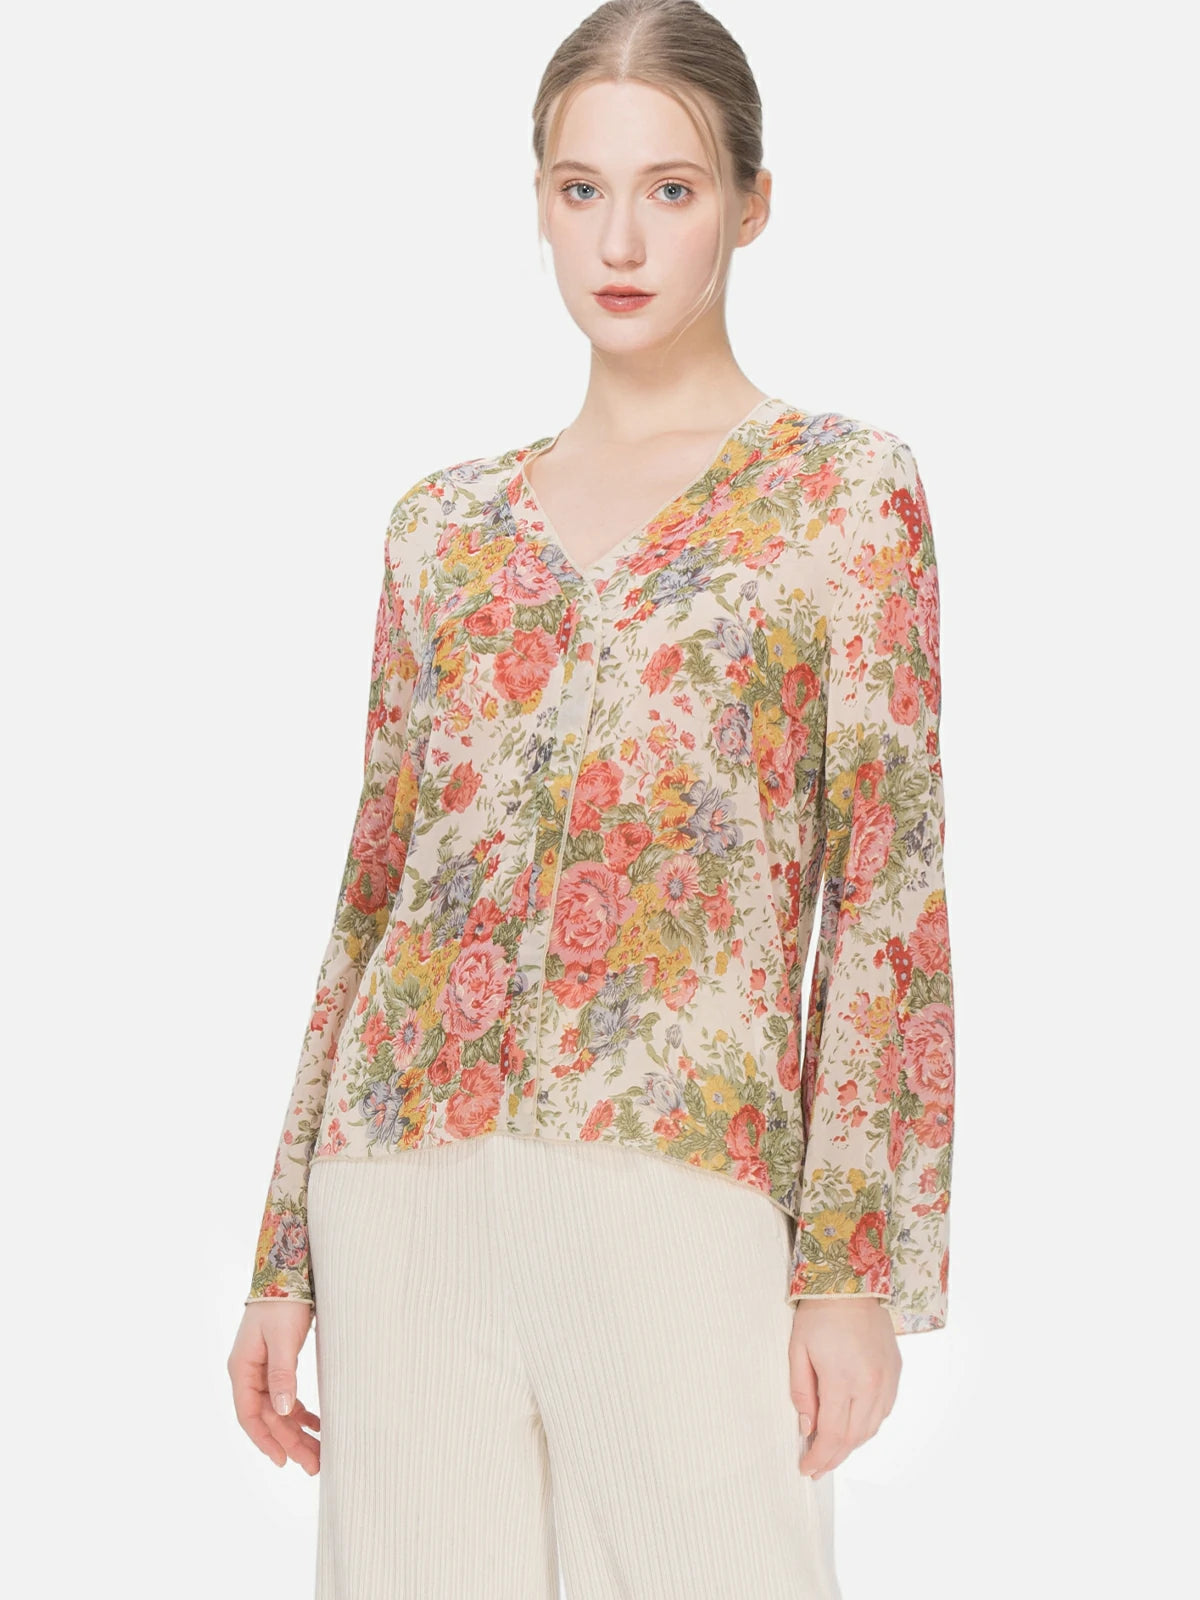 Versatile Bohemian-inspired blouse featuring a floral print, V-neck design, and lightweight fabric, offering both comfort and artistic style for various occasions.